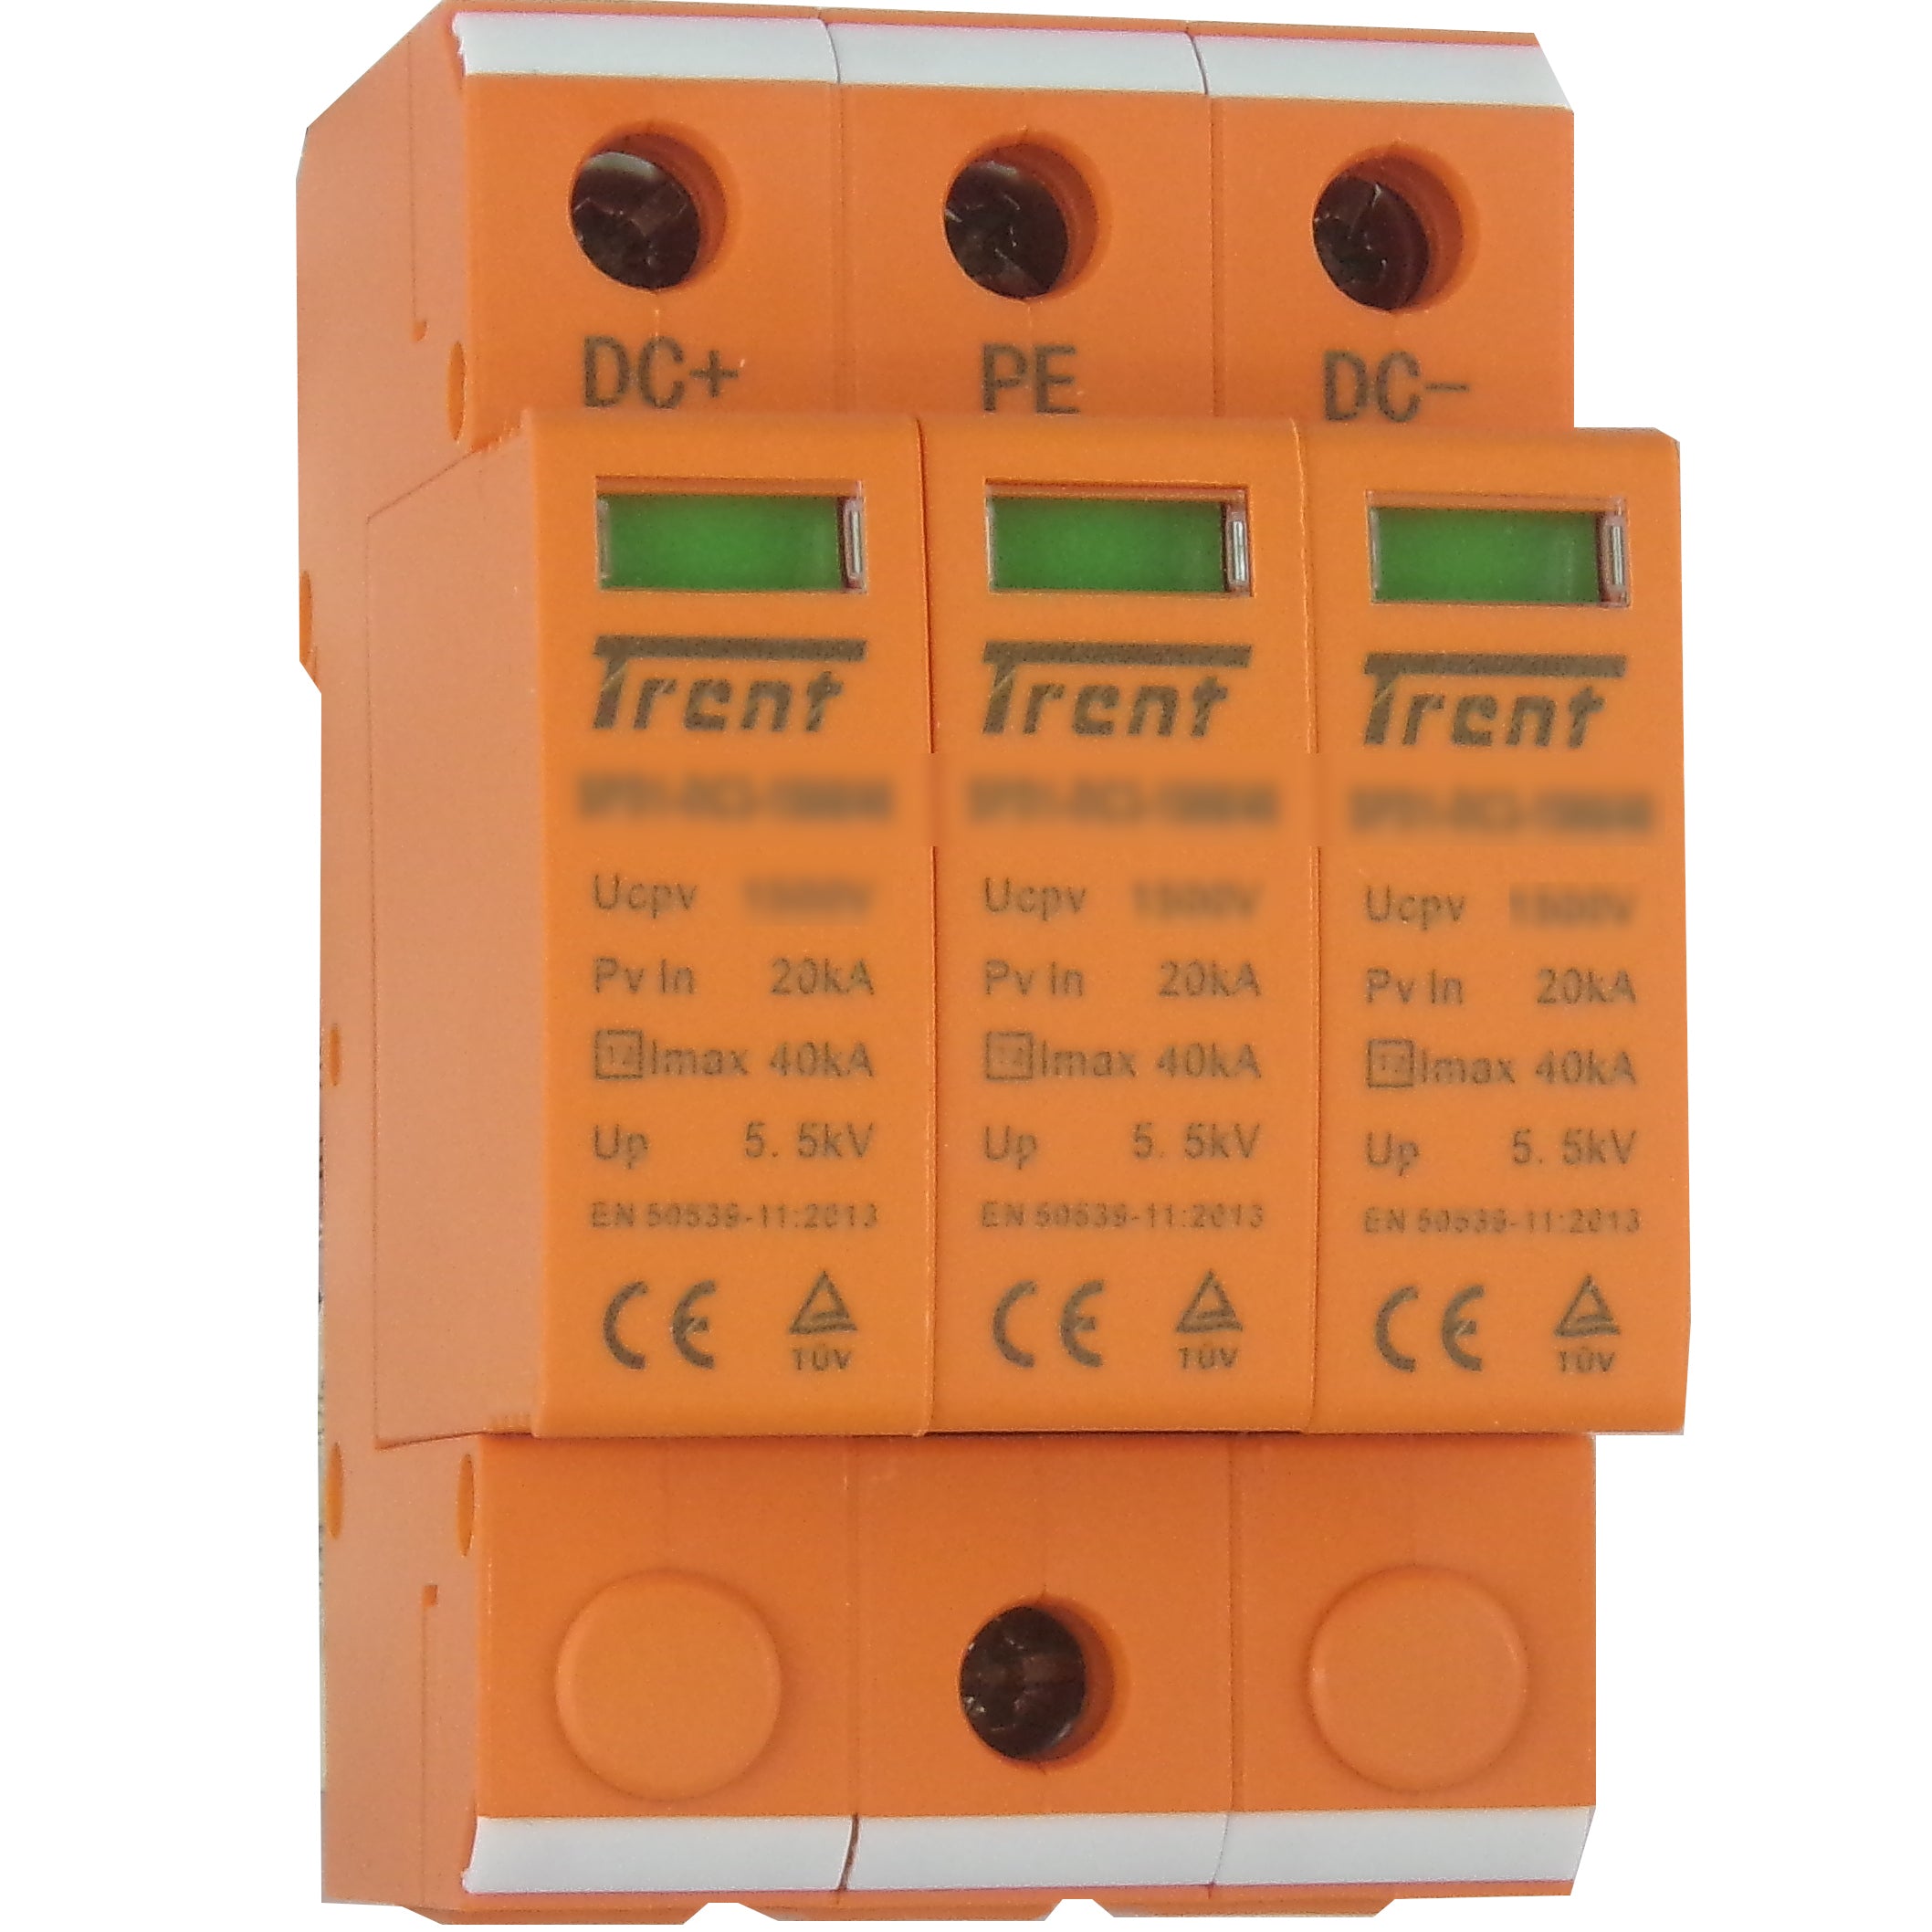 SPD1-DC/3-1000/40, 1000VDC Surge Protection Device for Photovoltaic Systems, Type 2 40kA